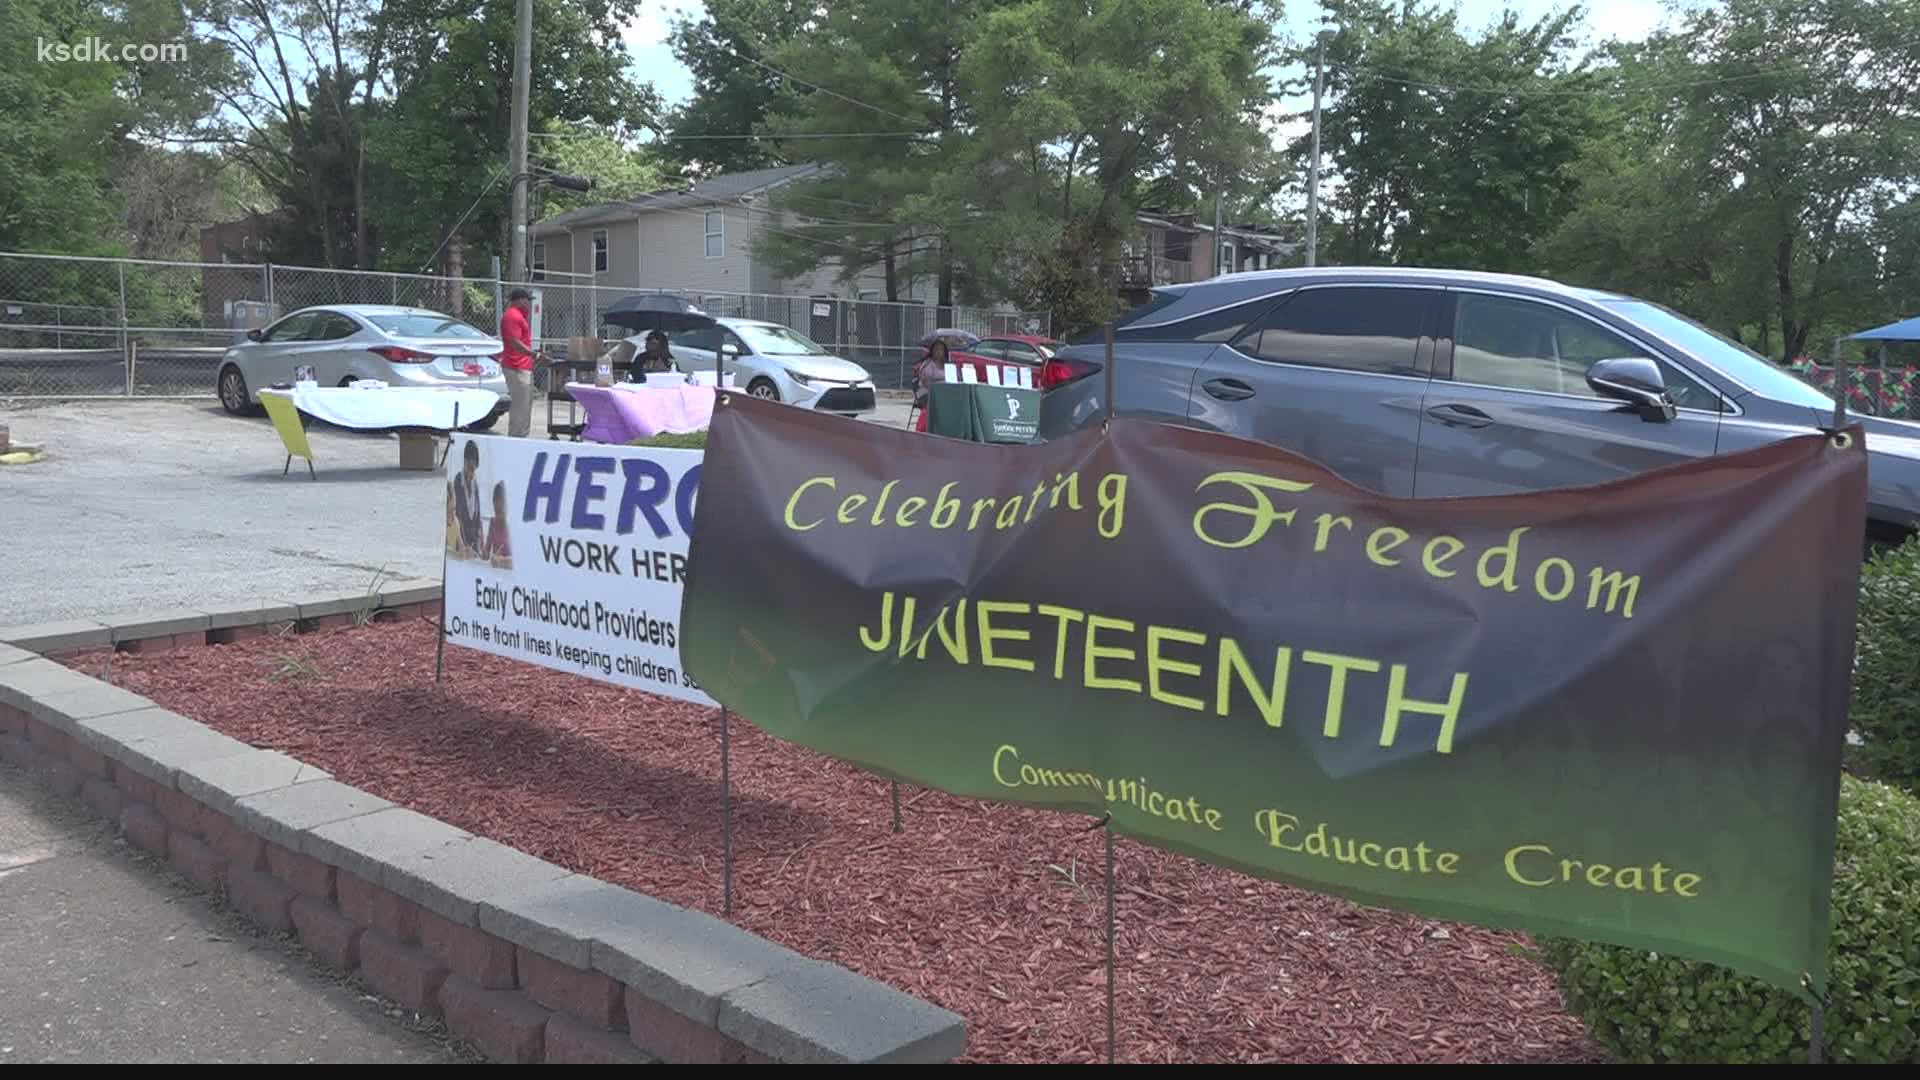 The mayor announced Juneteeth would be a city holiday beginning on June 19, 2020.